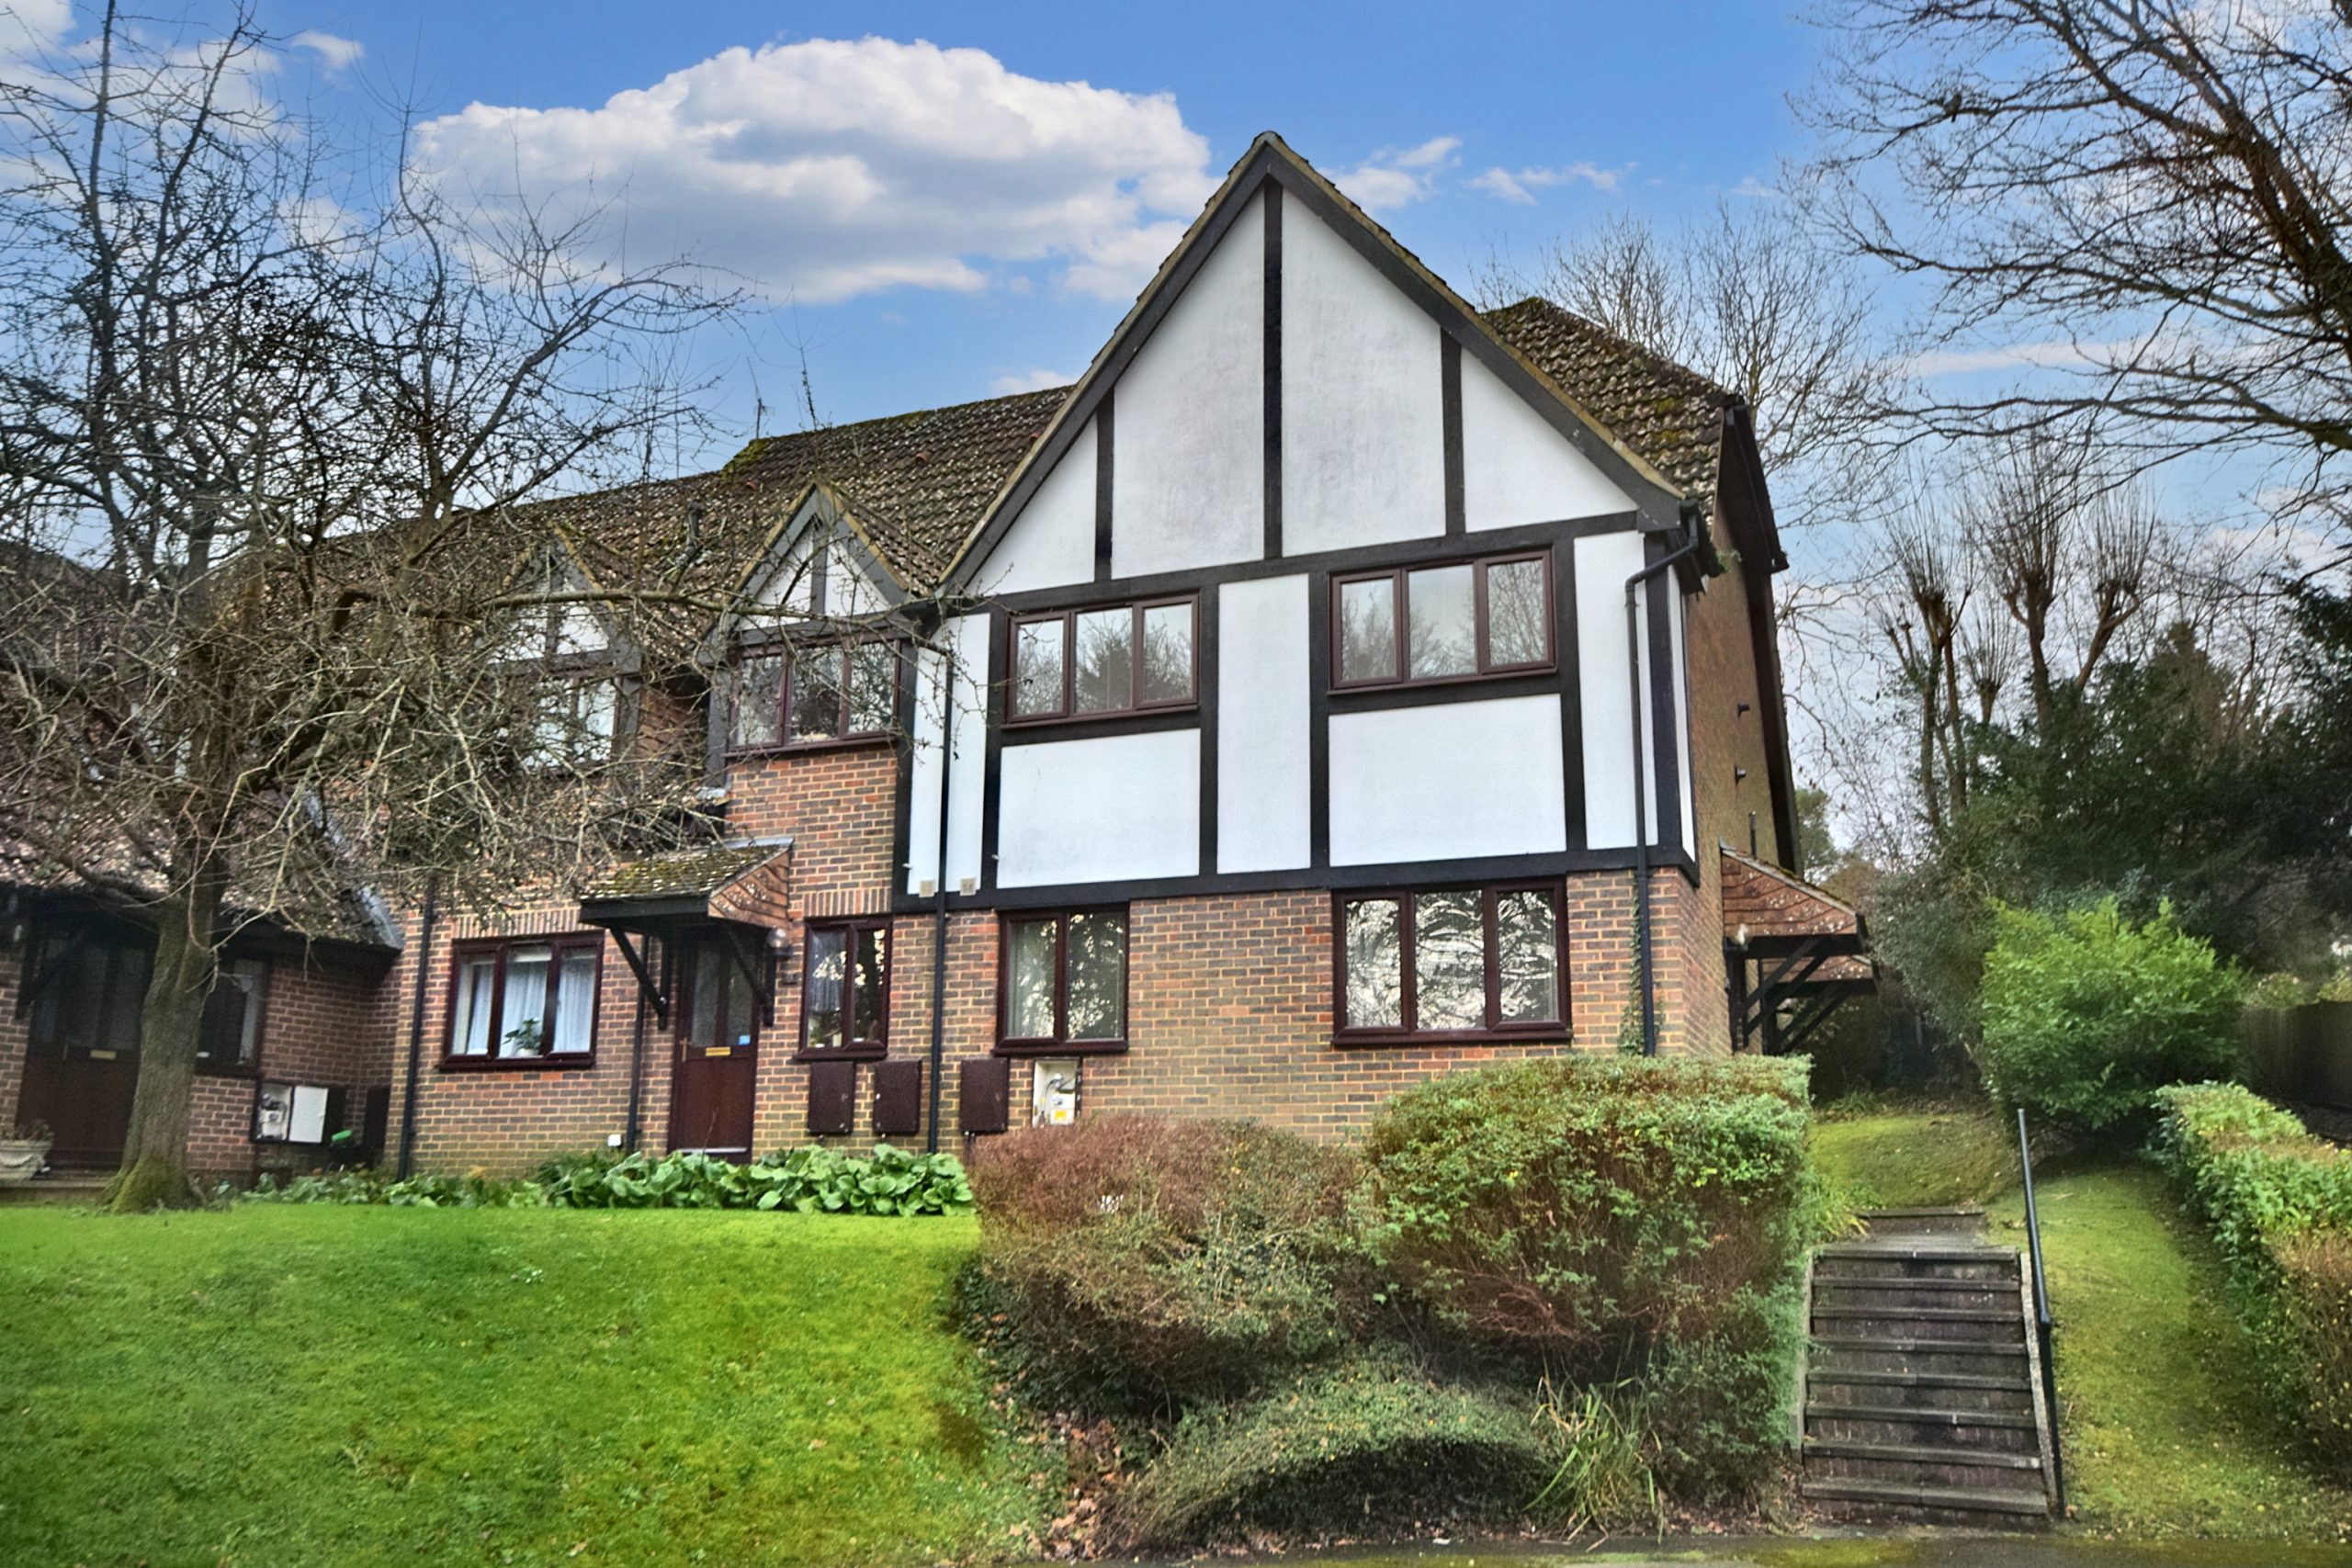 Sales Market hotting up – Sale agreed in Frensham at guide price today …..